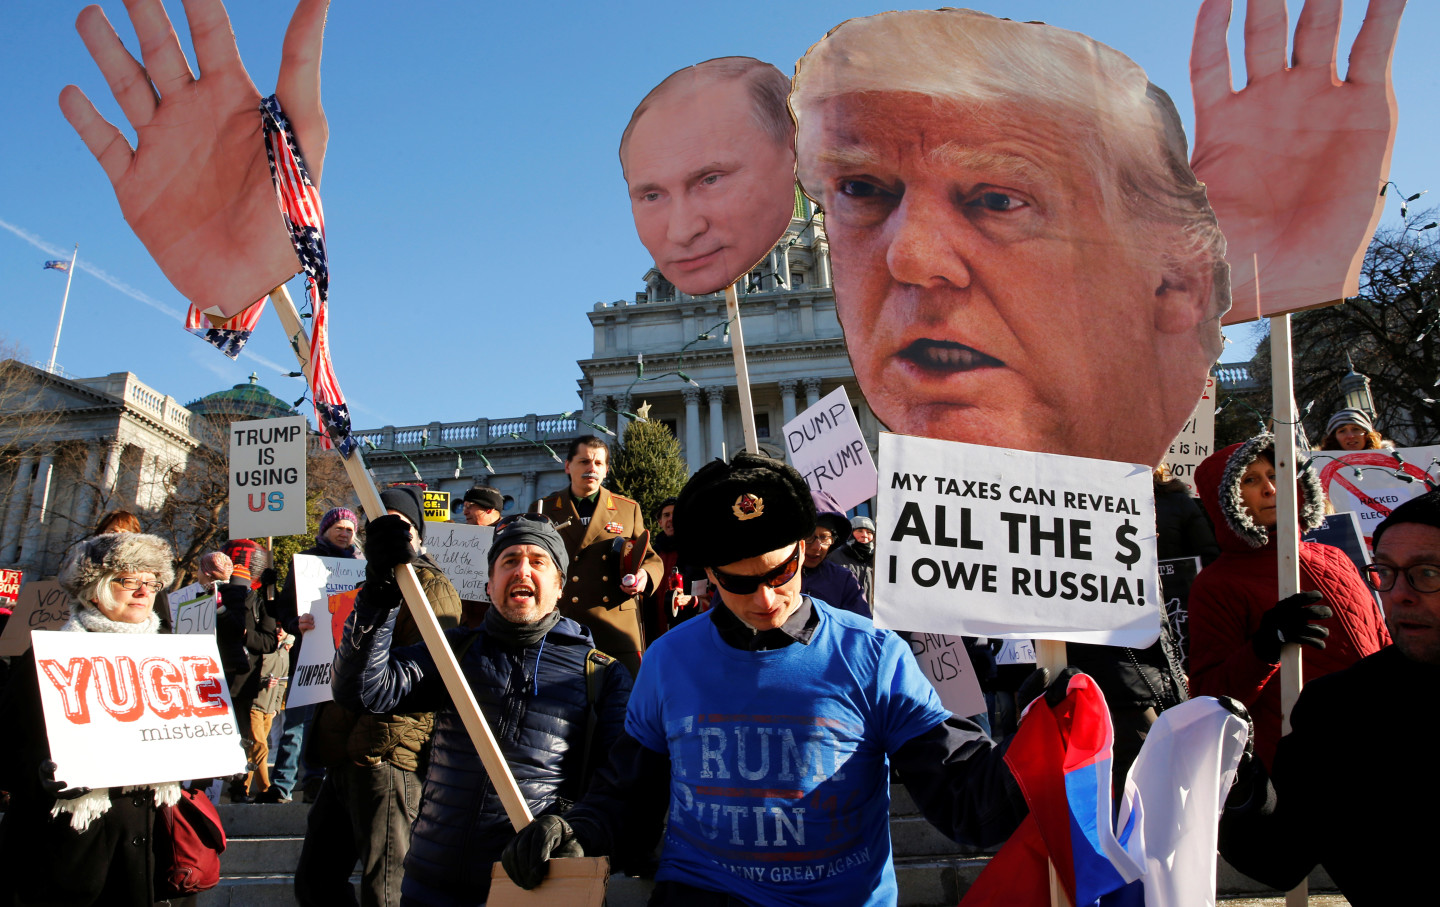 People protest after Russian hacking allegations.